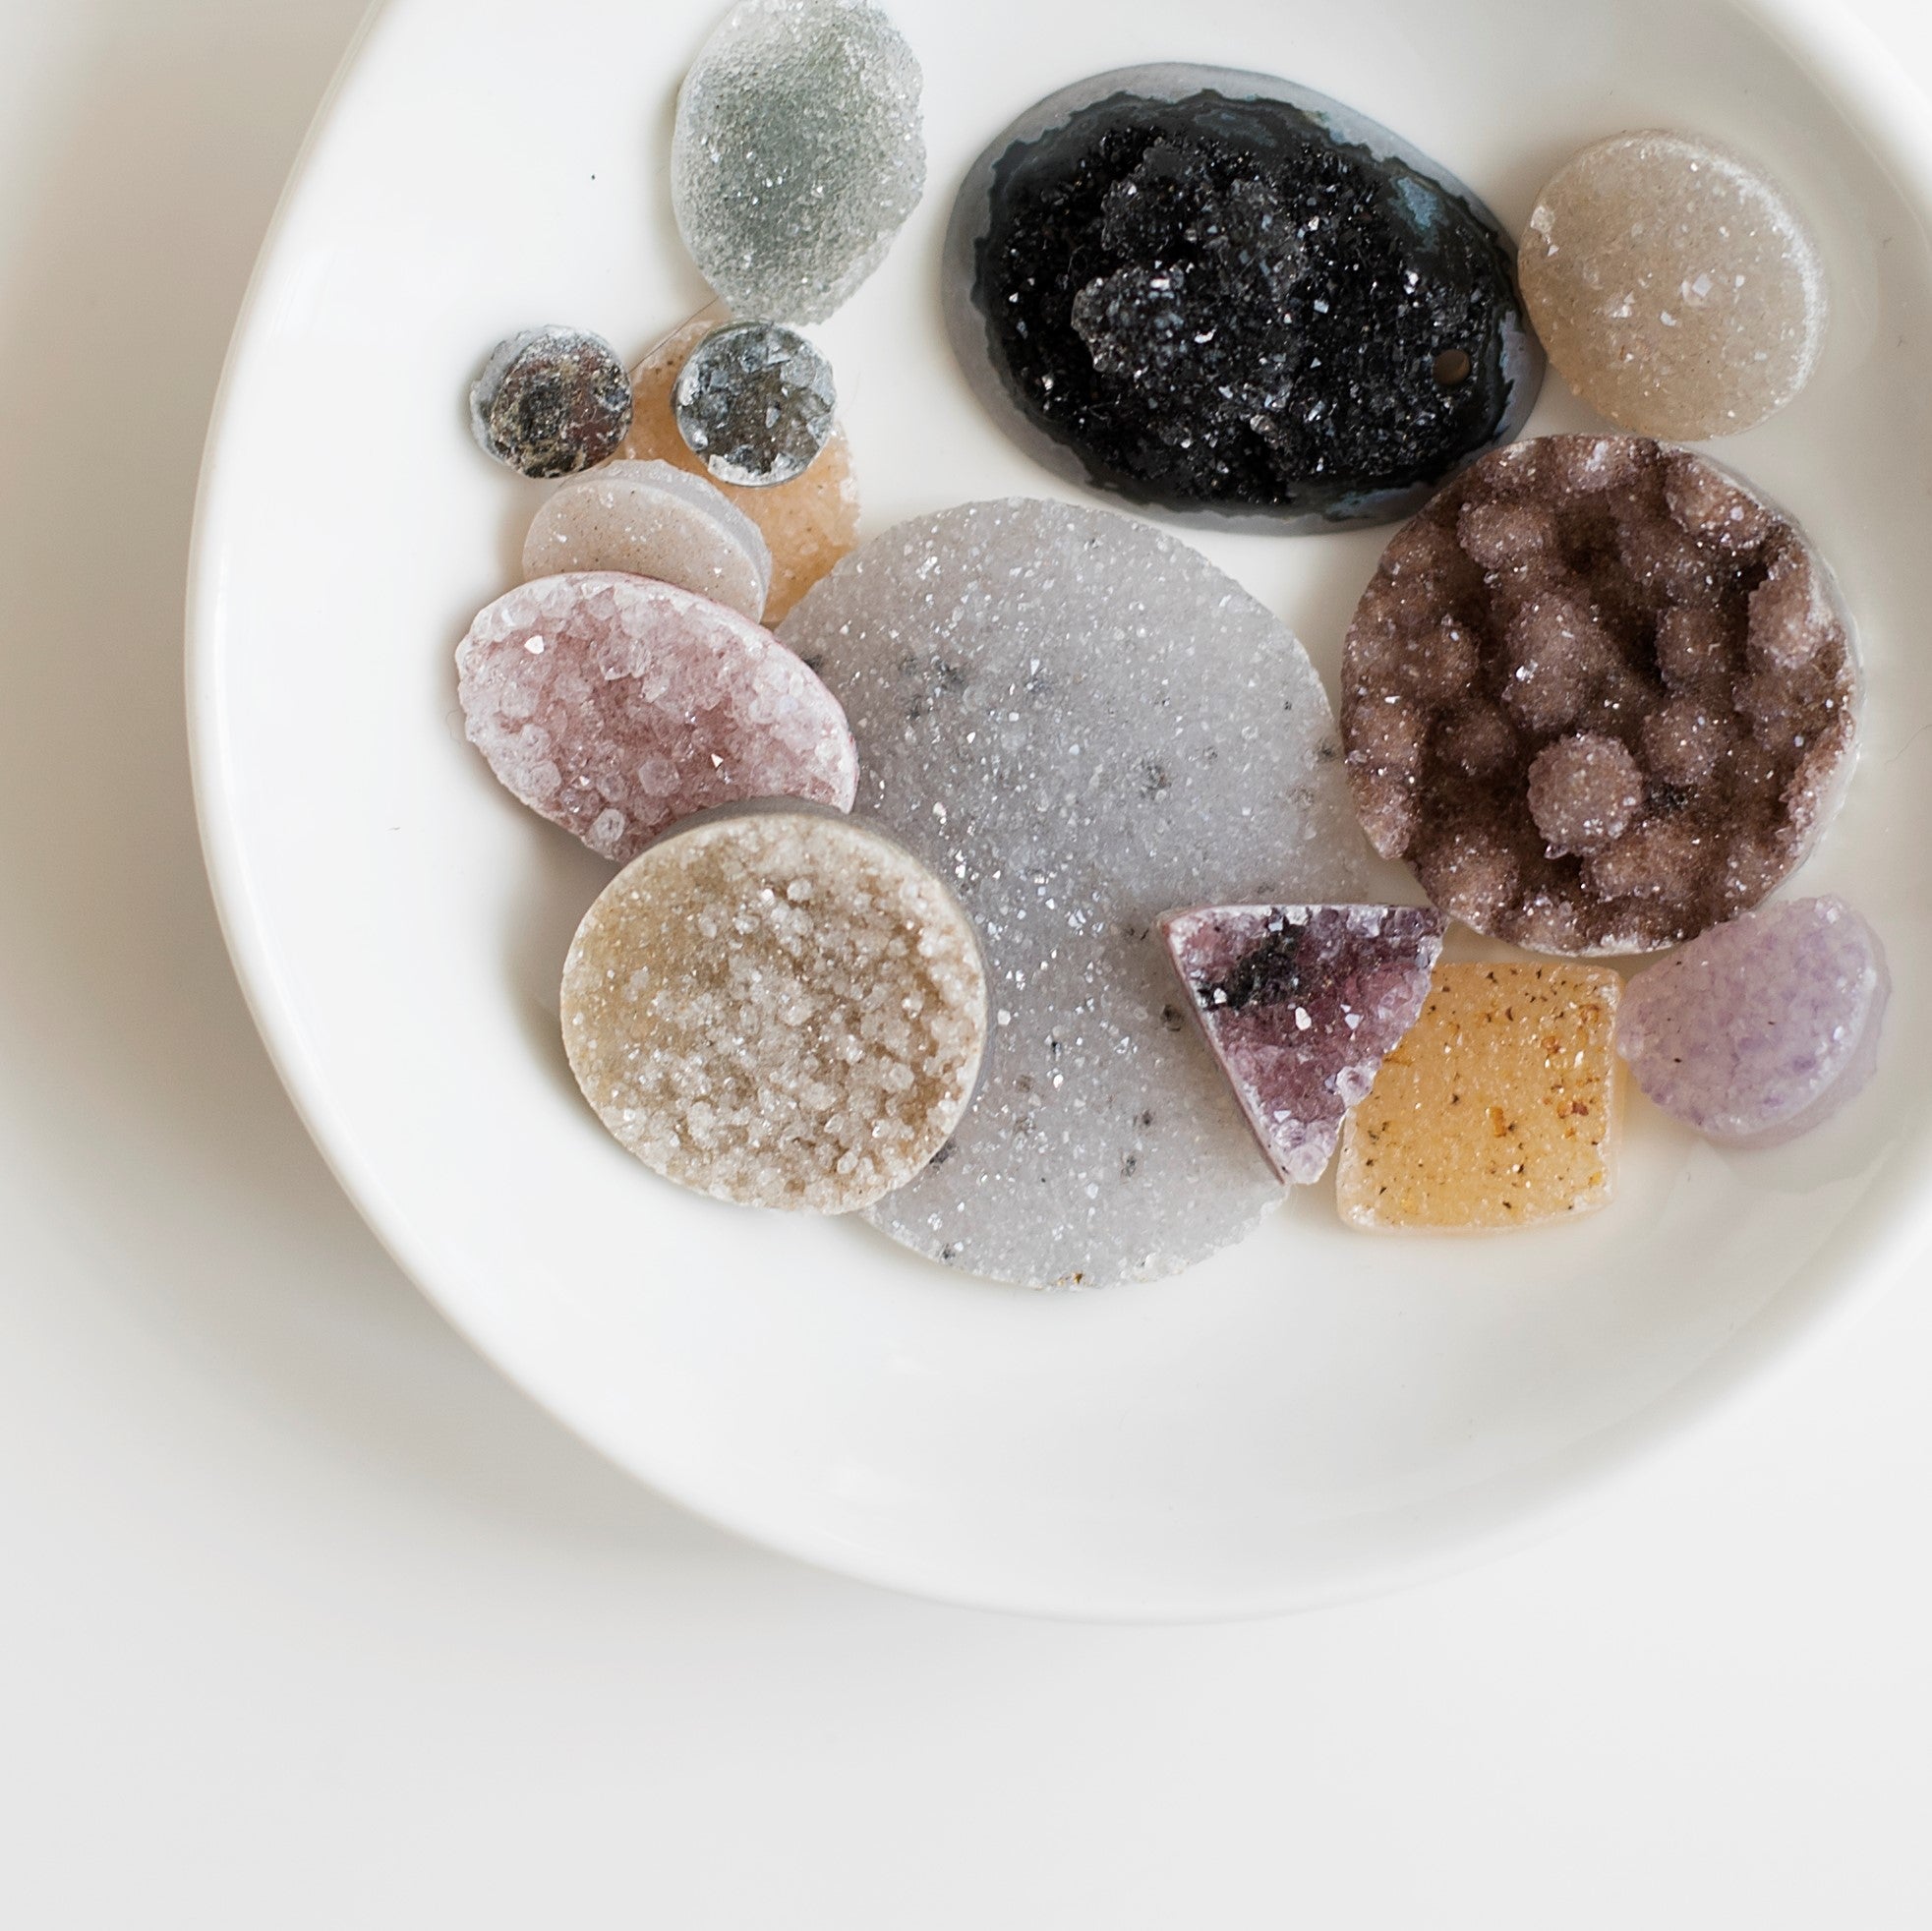 Formed over millennia, the tiny, glittering crystals that make up druzy grow from mineral-rich water trapped in pockets of rock. The resulting plates of druzy occur naturally in an incredible range of colors and sizes, and are often cut for jewelry or har